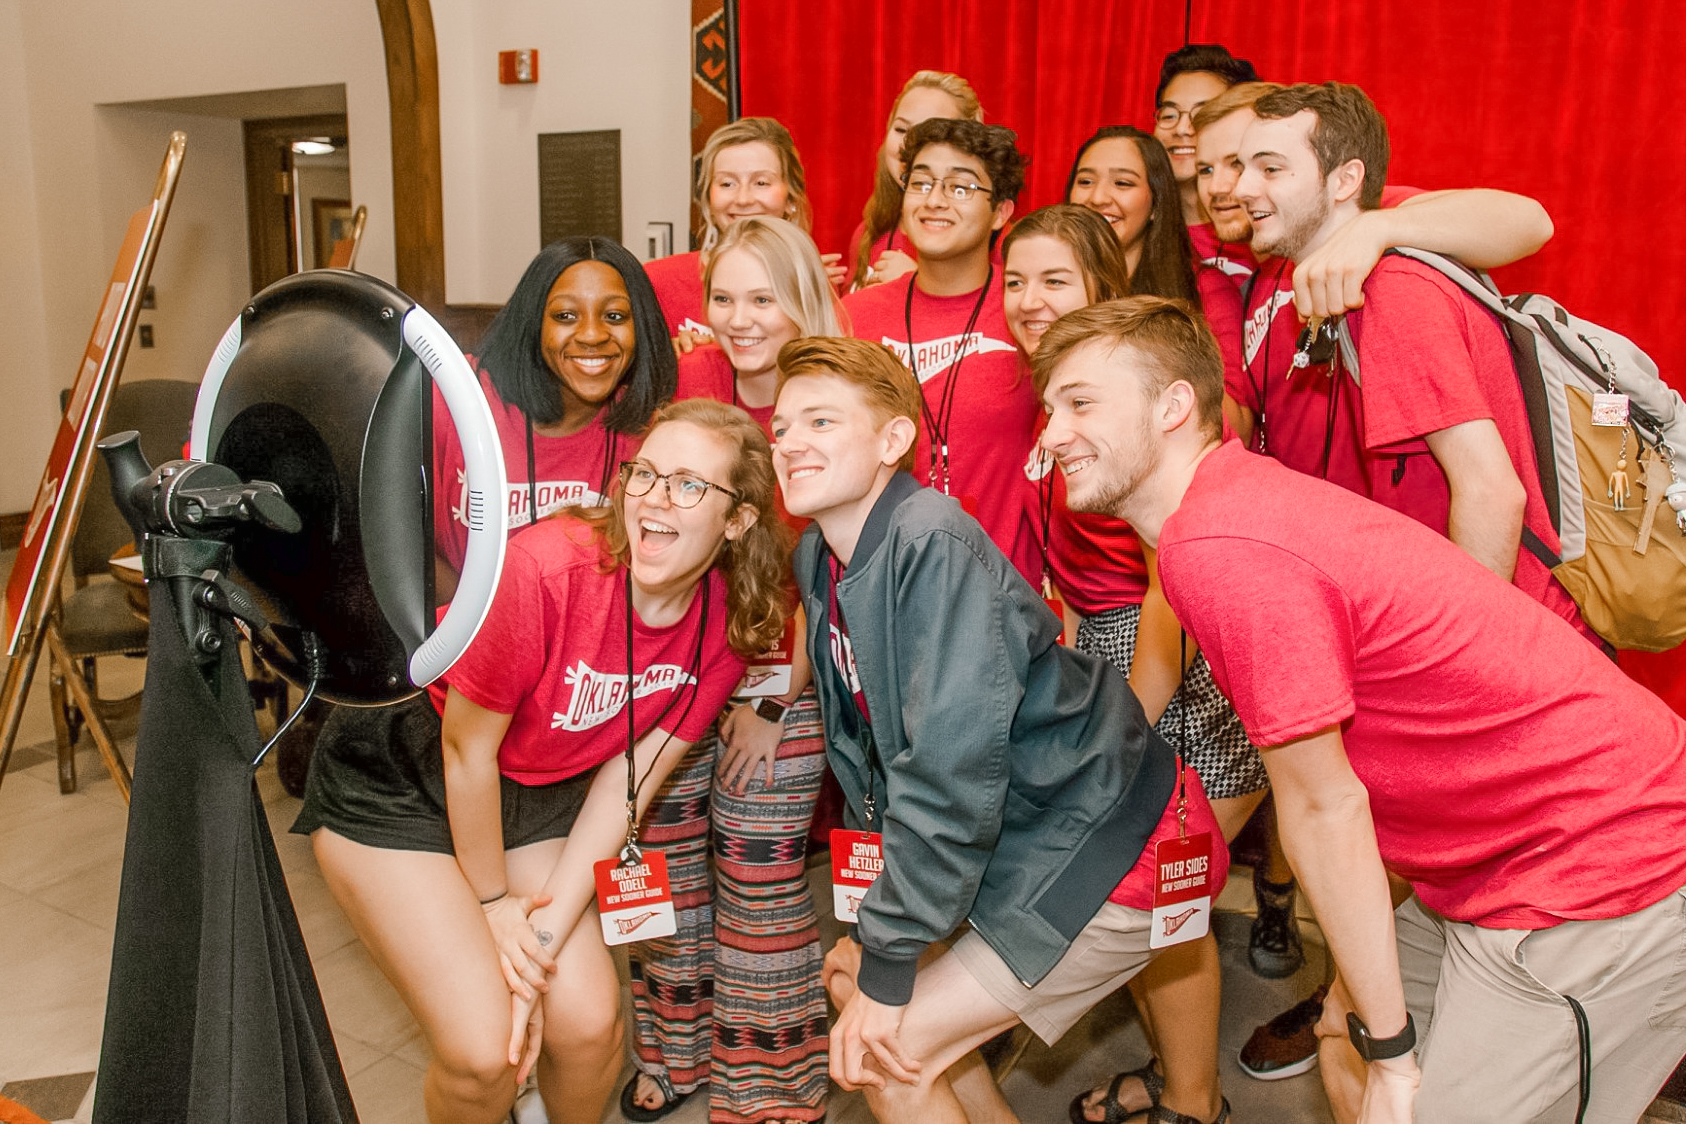 Students taking a group photo in a photo booth at New Student Orientation.